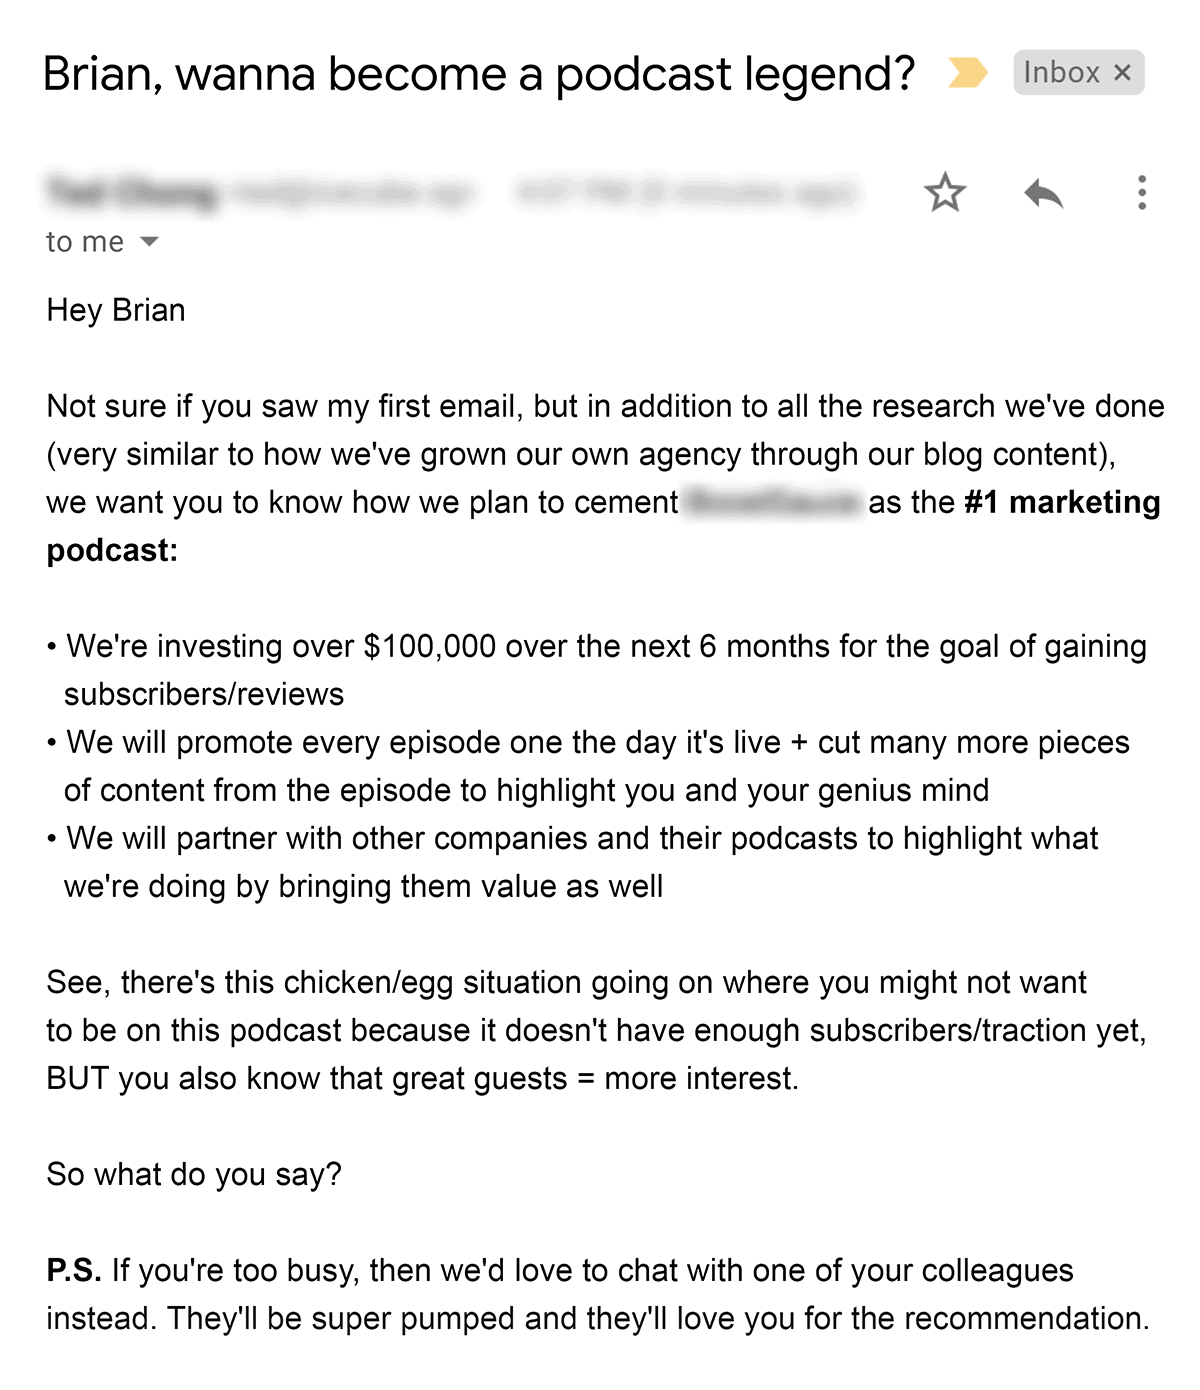 Follow-up email